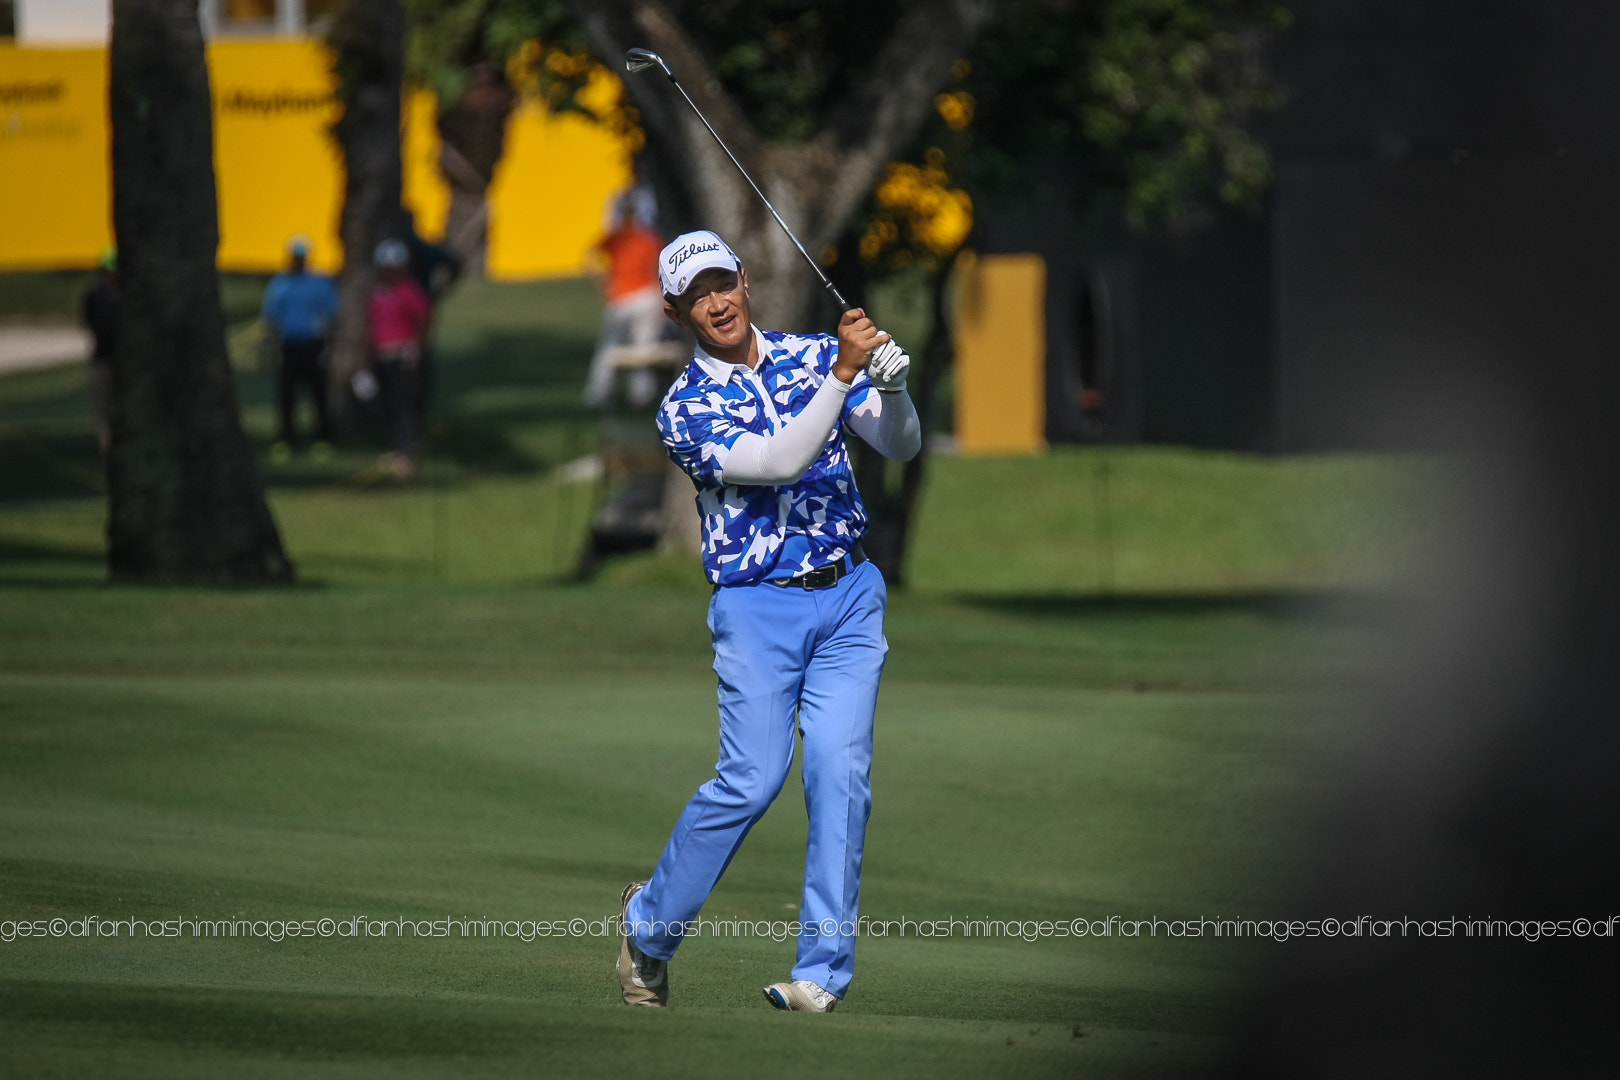 Canon EOS-1D Mark III + Tamron SP 150-600mm F5-6.3 Di VC USD sample photo. Maybank championship 2017 day 01 photos of the day photography